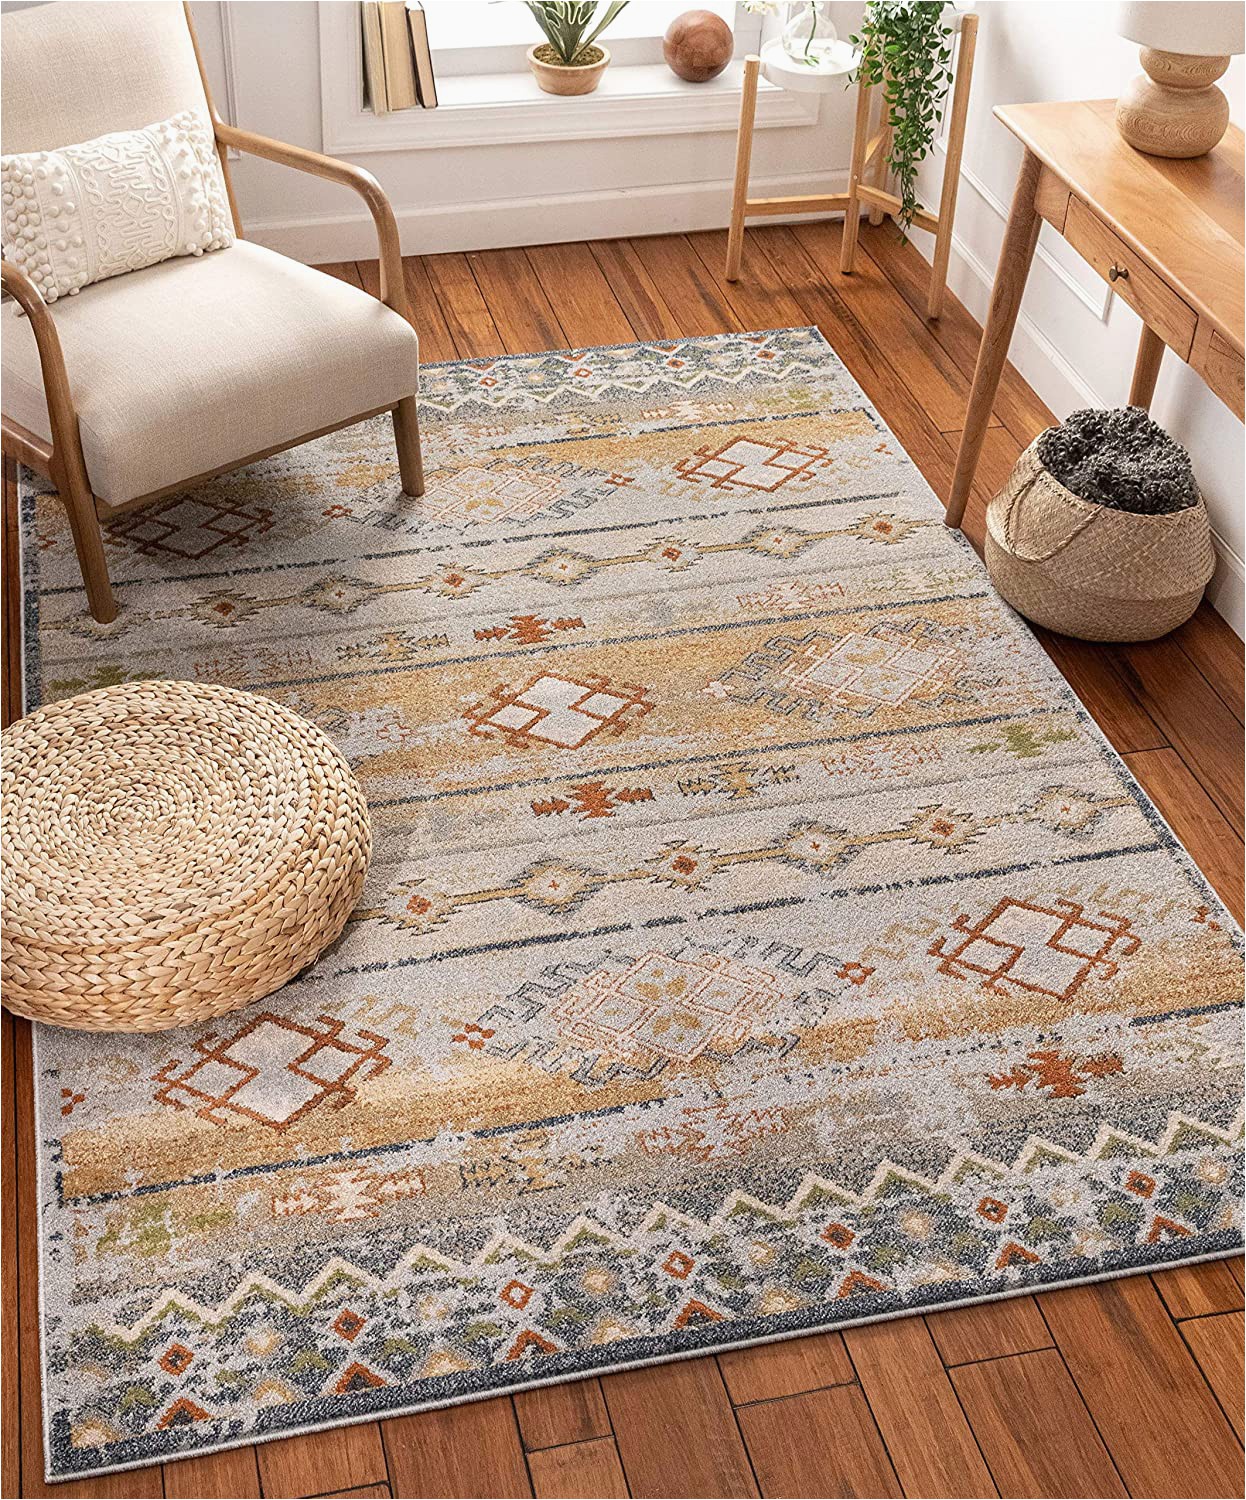 Bed Bath and Beyond 8×10 Rugs Well Woven Elu Cream Vintage Panel Pattern area Rug 8×11 7 10" X 10 6"